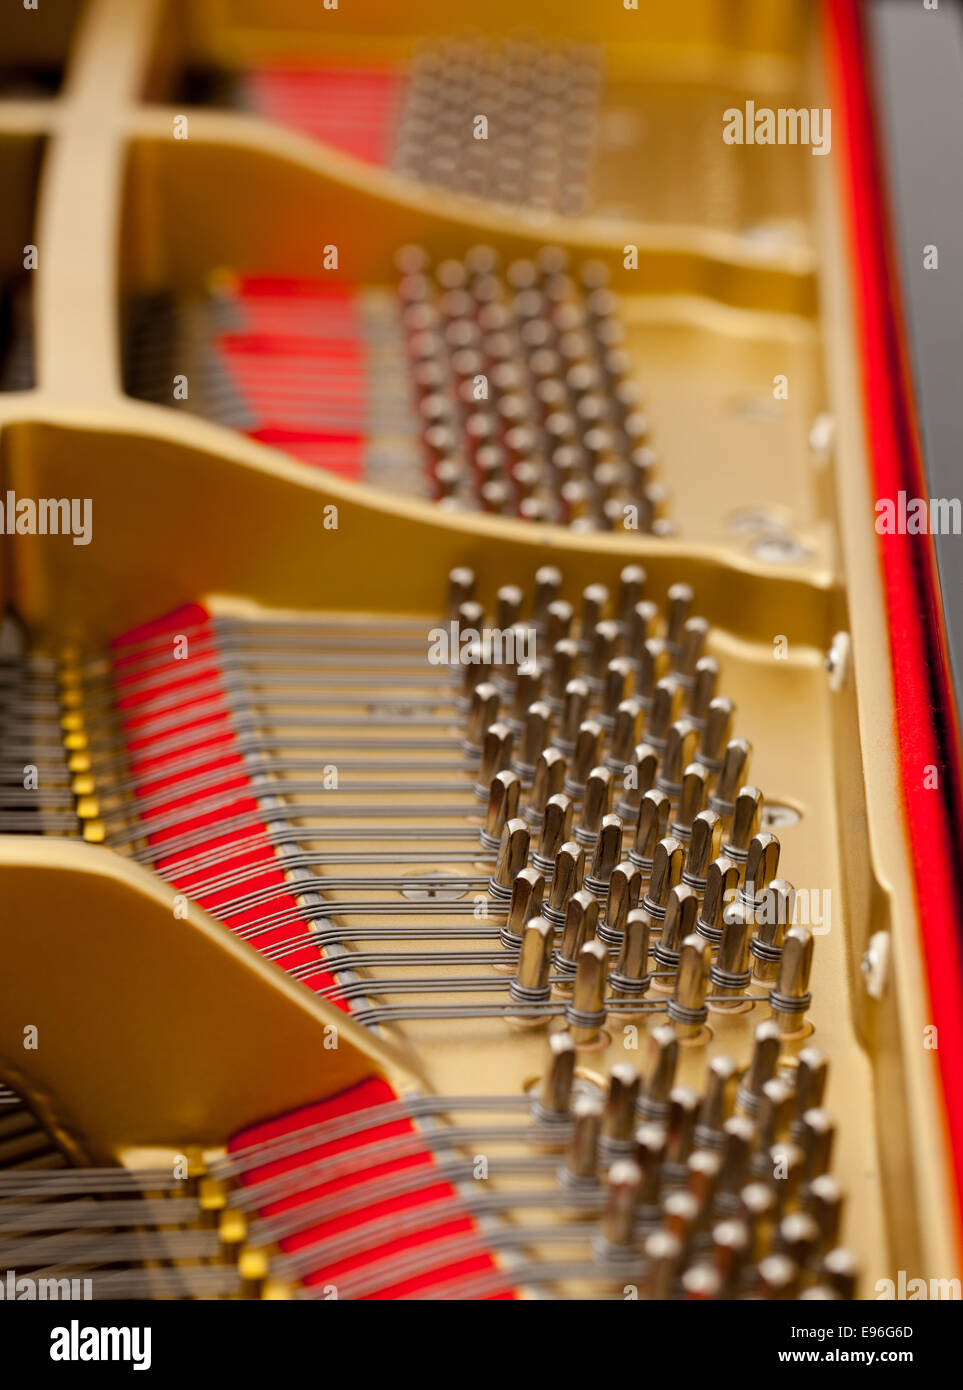 Interior of grand piano with strings Stock Photo